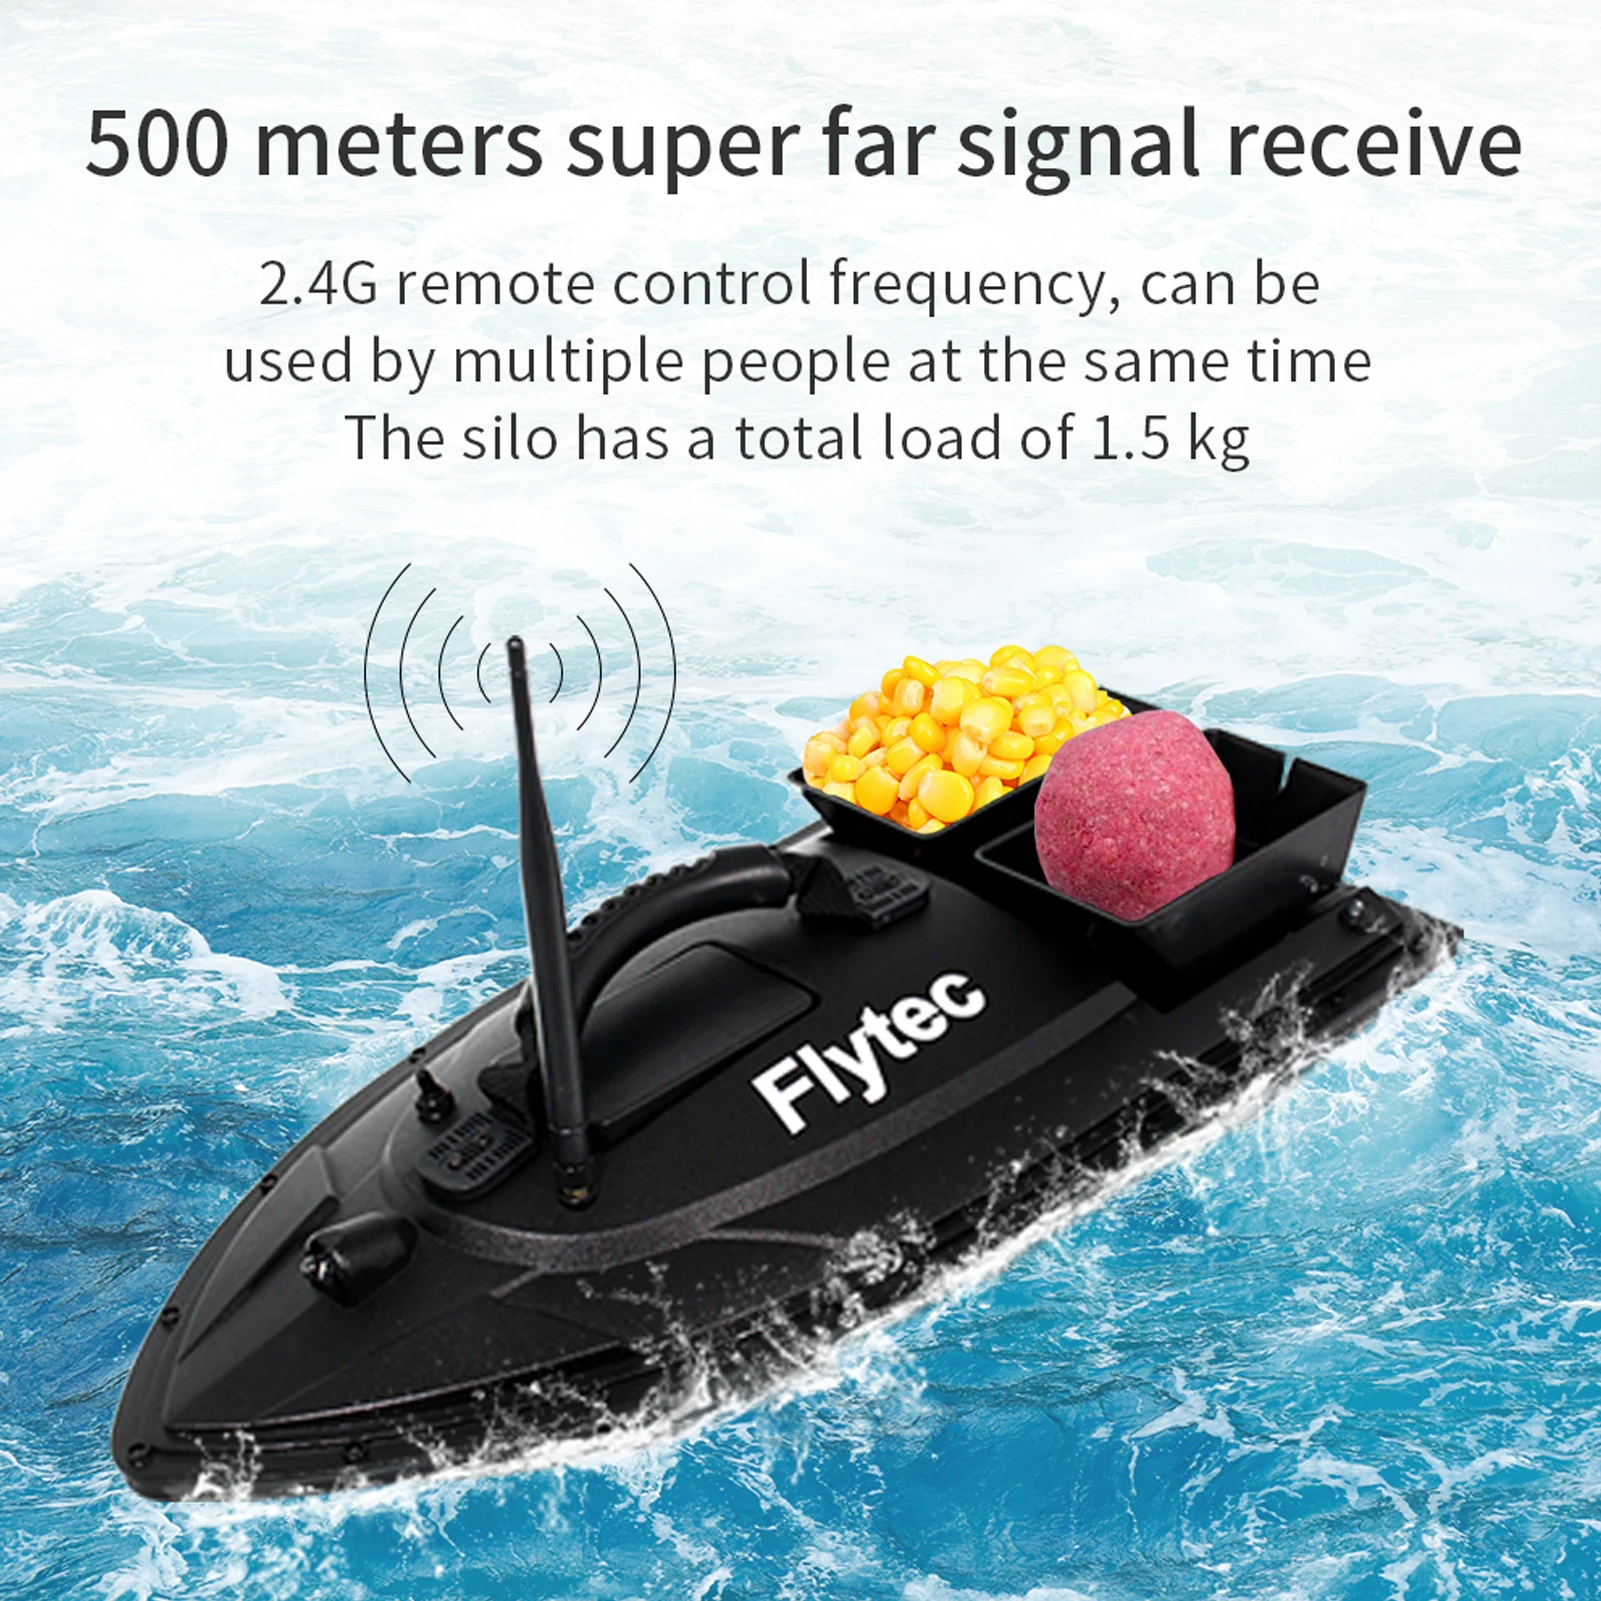 FLYTEC Fishing Bait Boat Fish Finder 1.5kg Loading 500m Remote Control 5.4km/h Max Speed Fishing Bait Boat Bait Thrower RC Boat enlarge